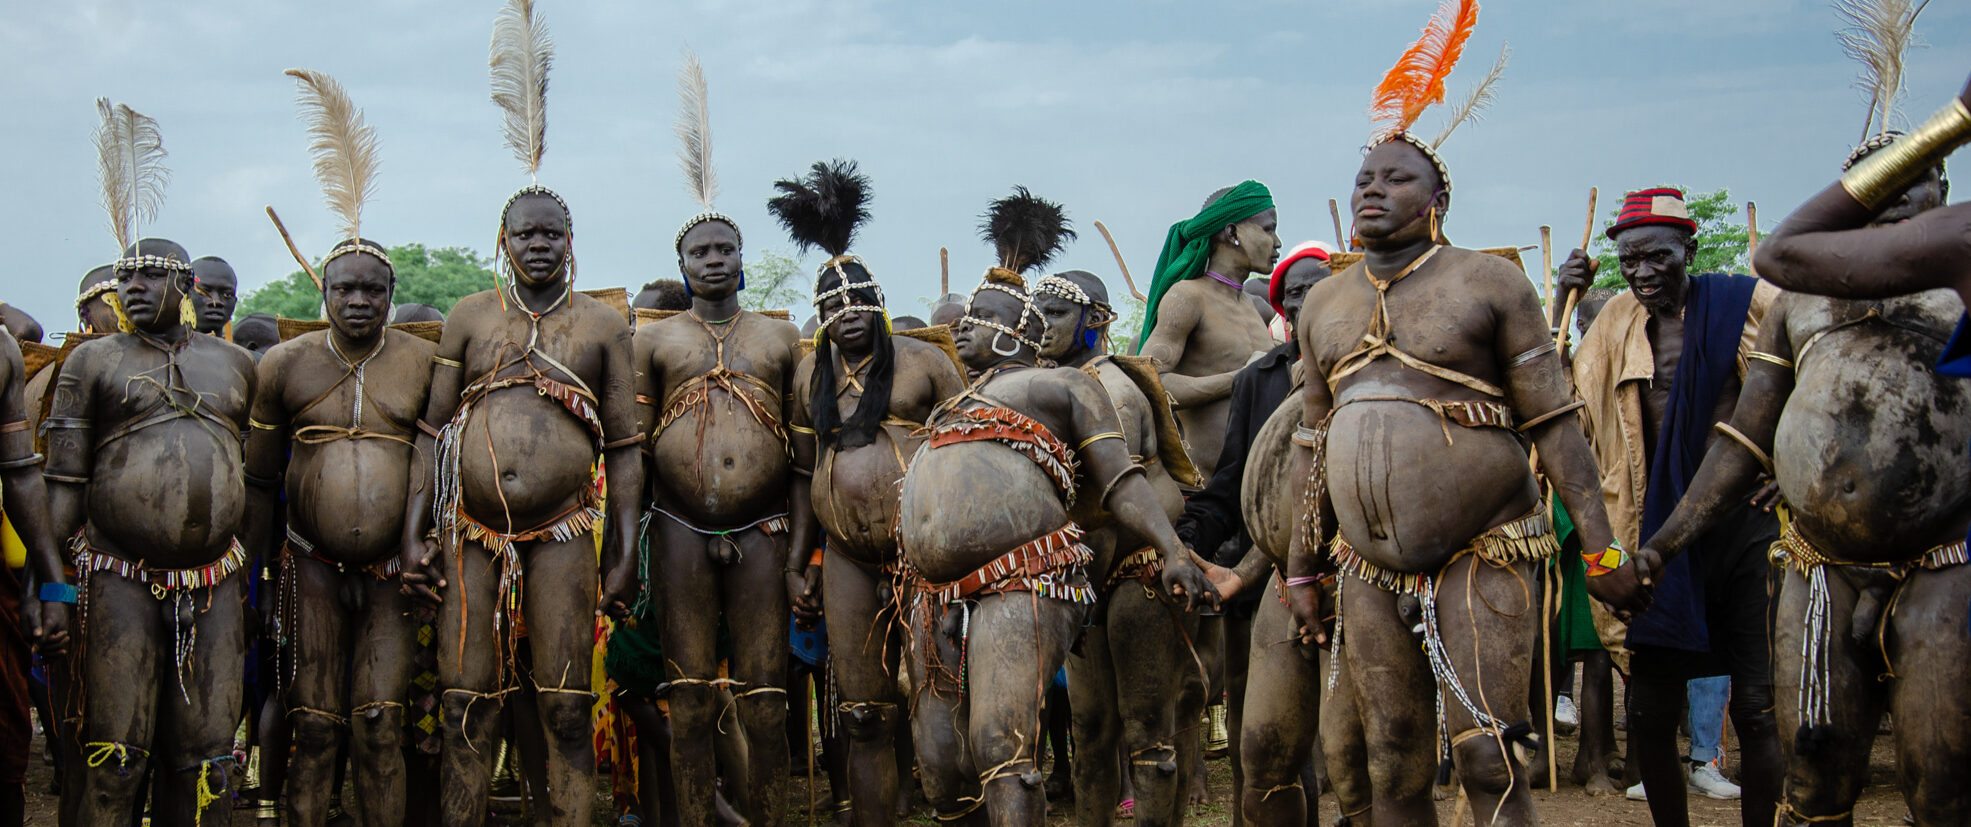 Bodi Tribe - Omo Valley Travel and Tours